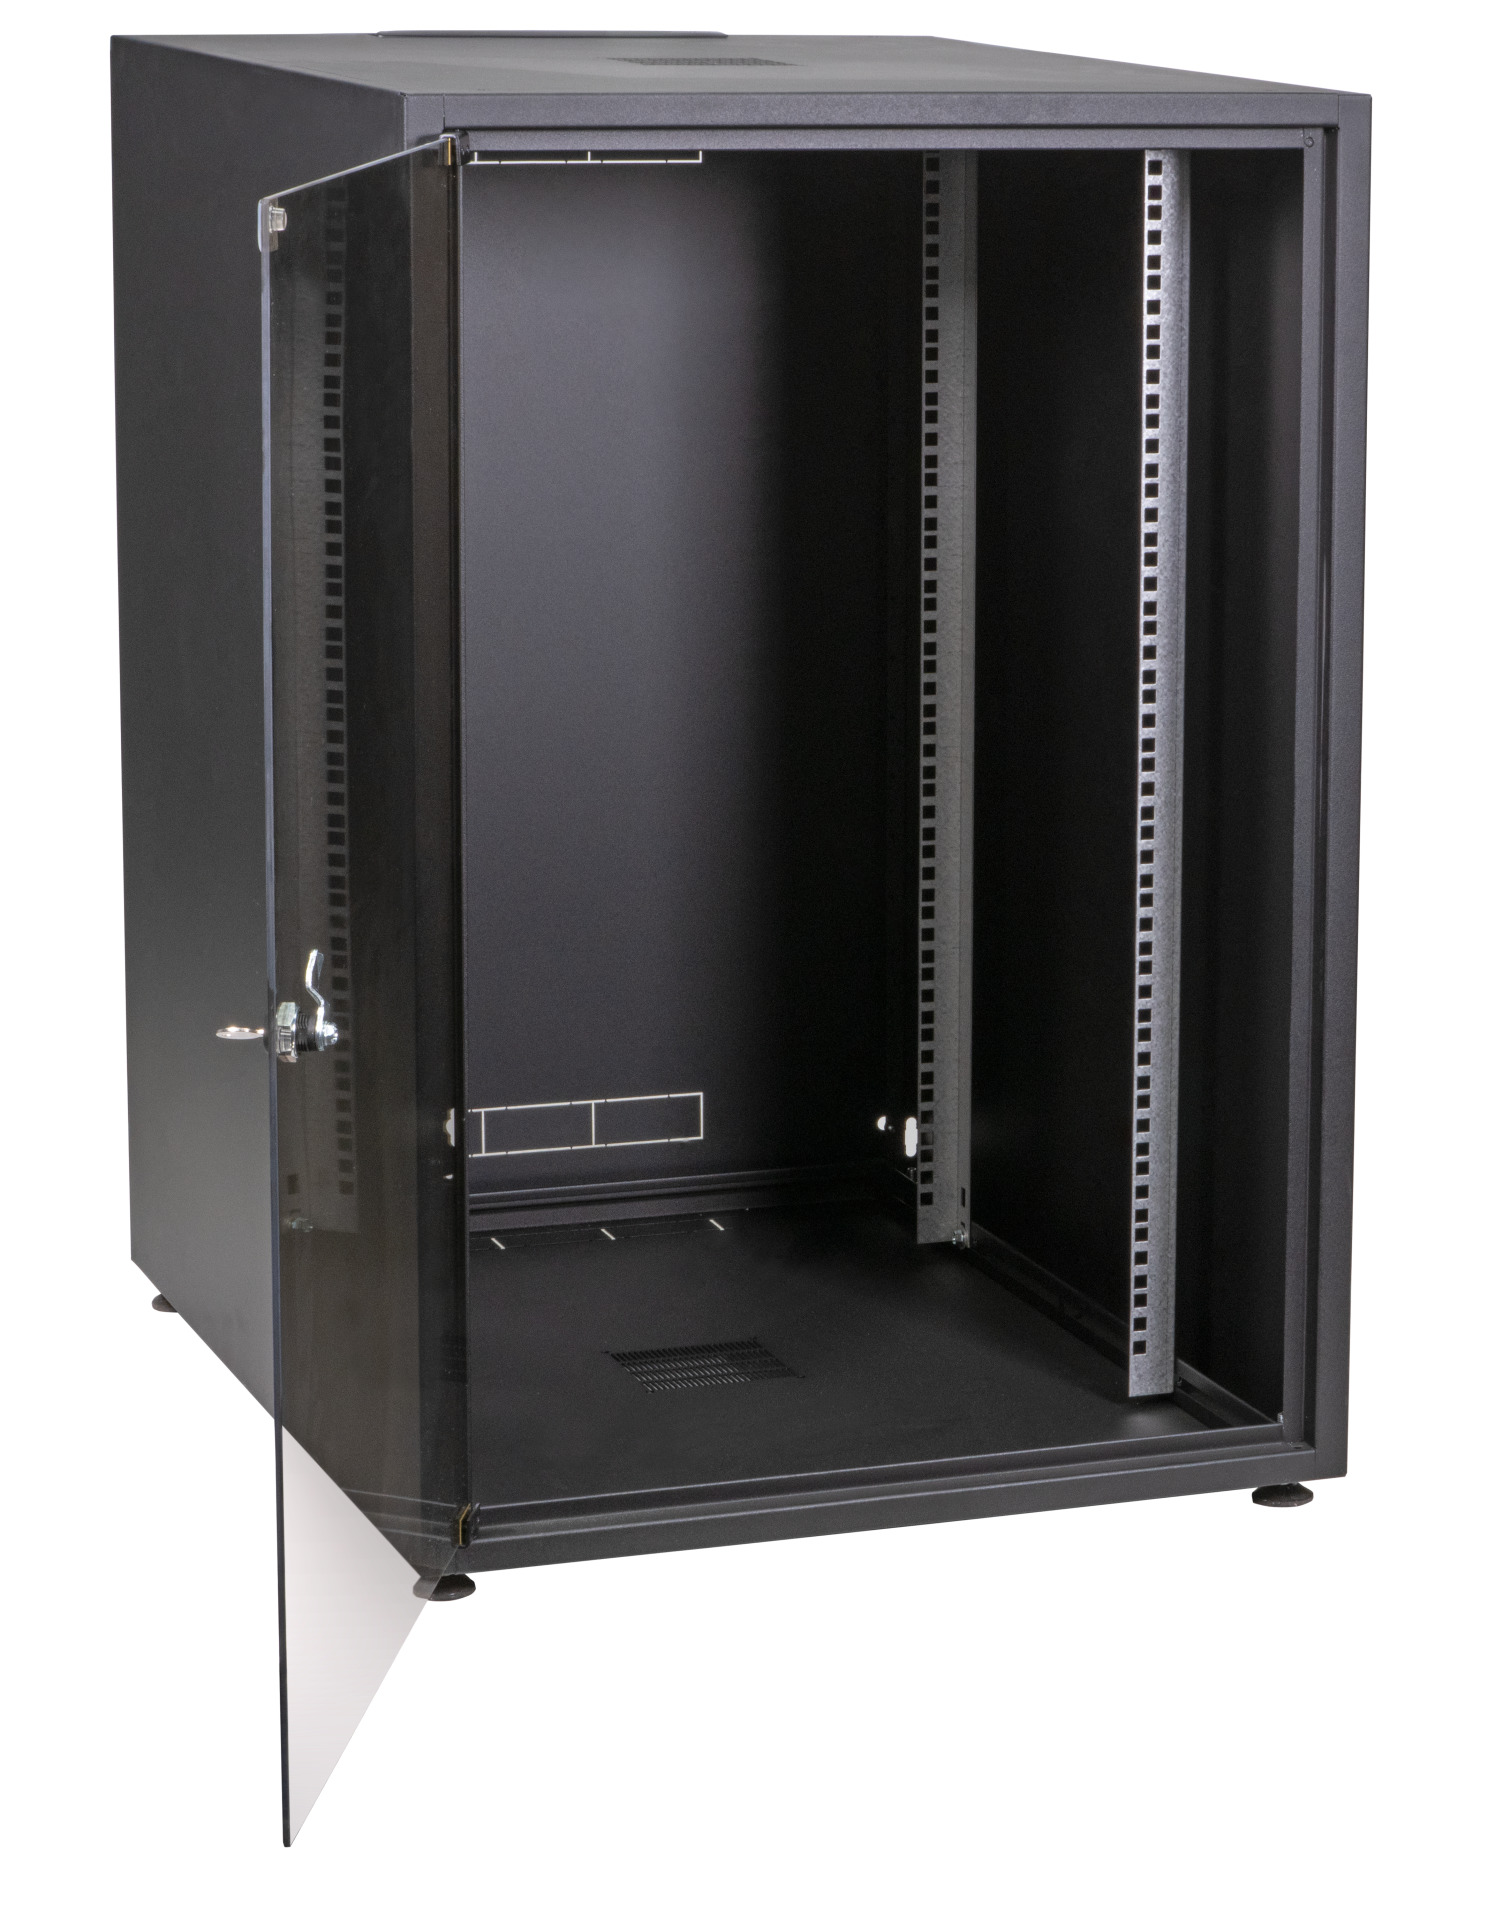 Network Cabinet OFFICE 18U, 600x600 mm, RAL9005